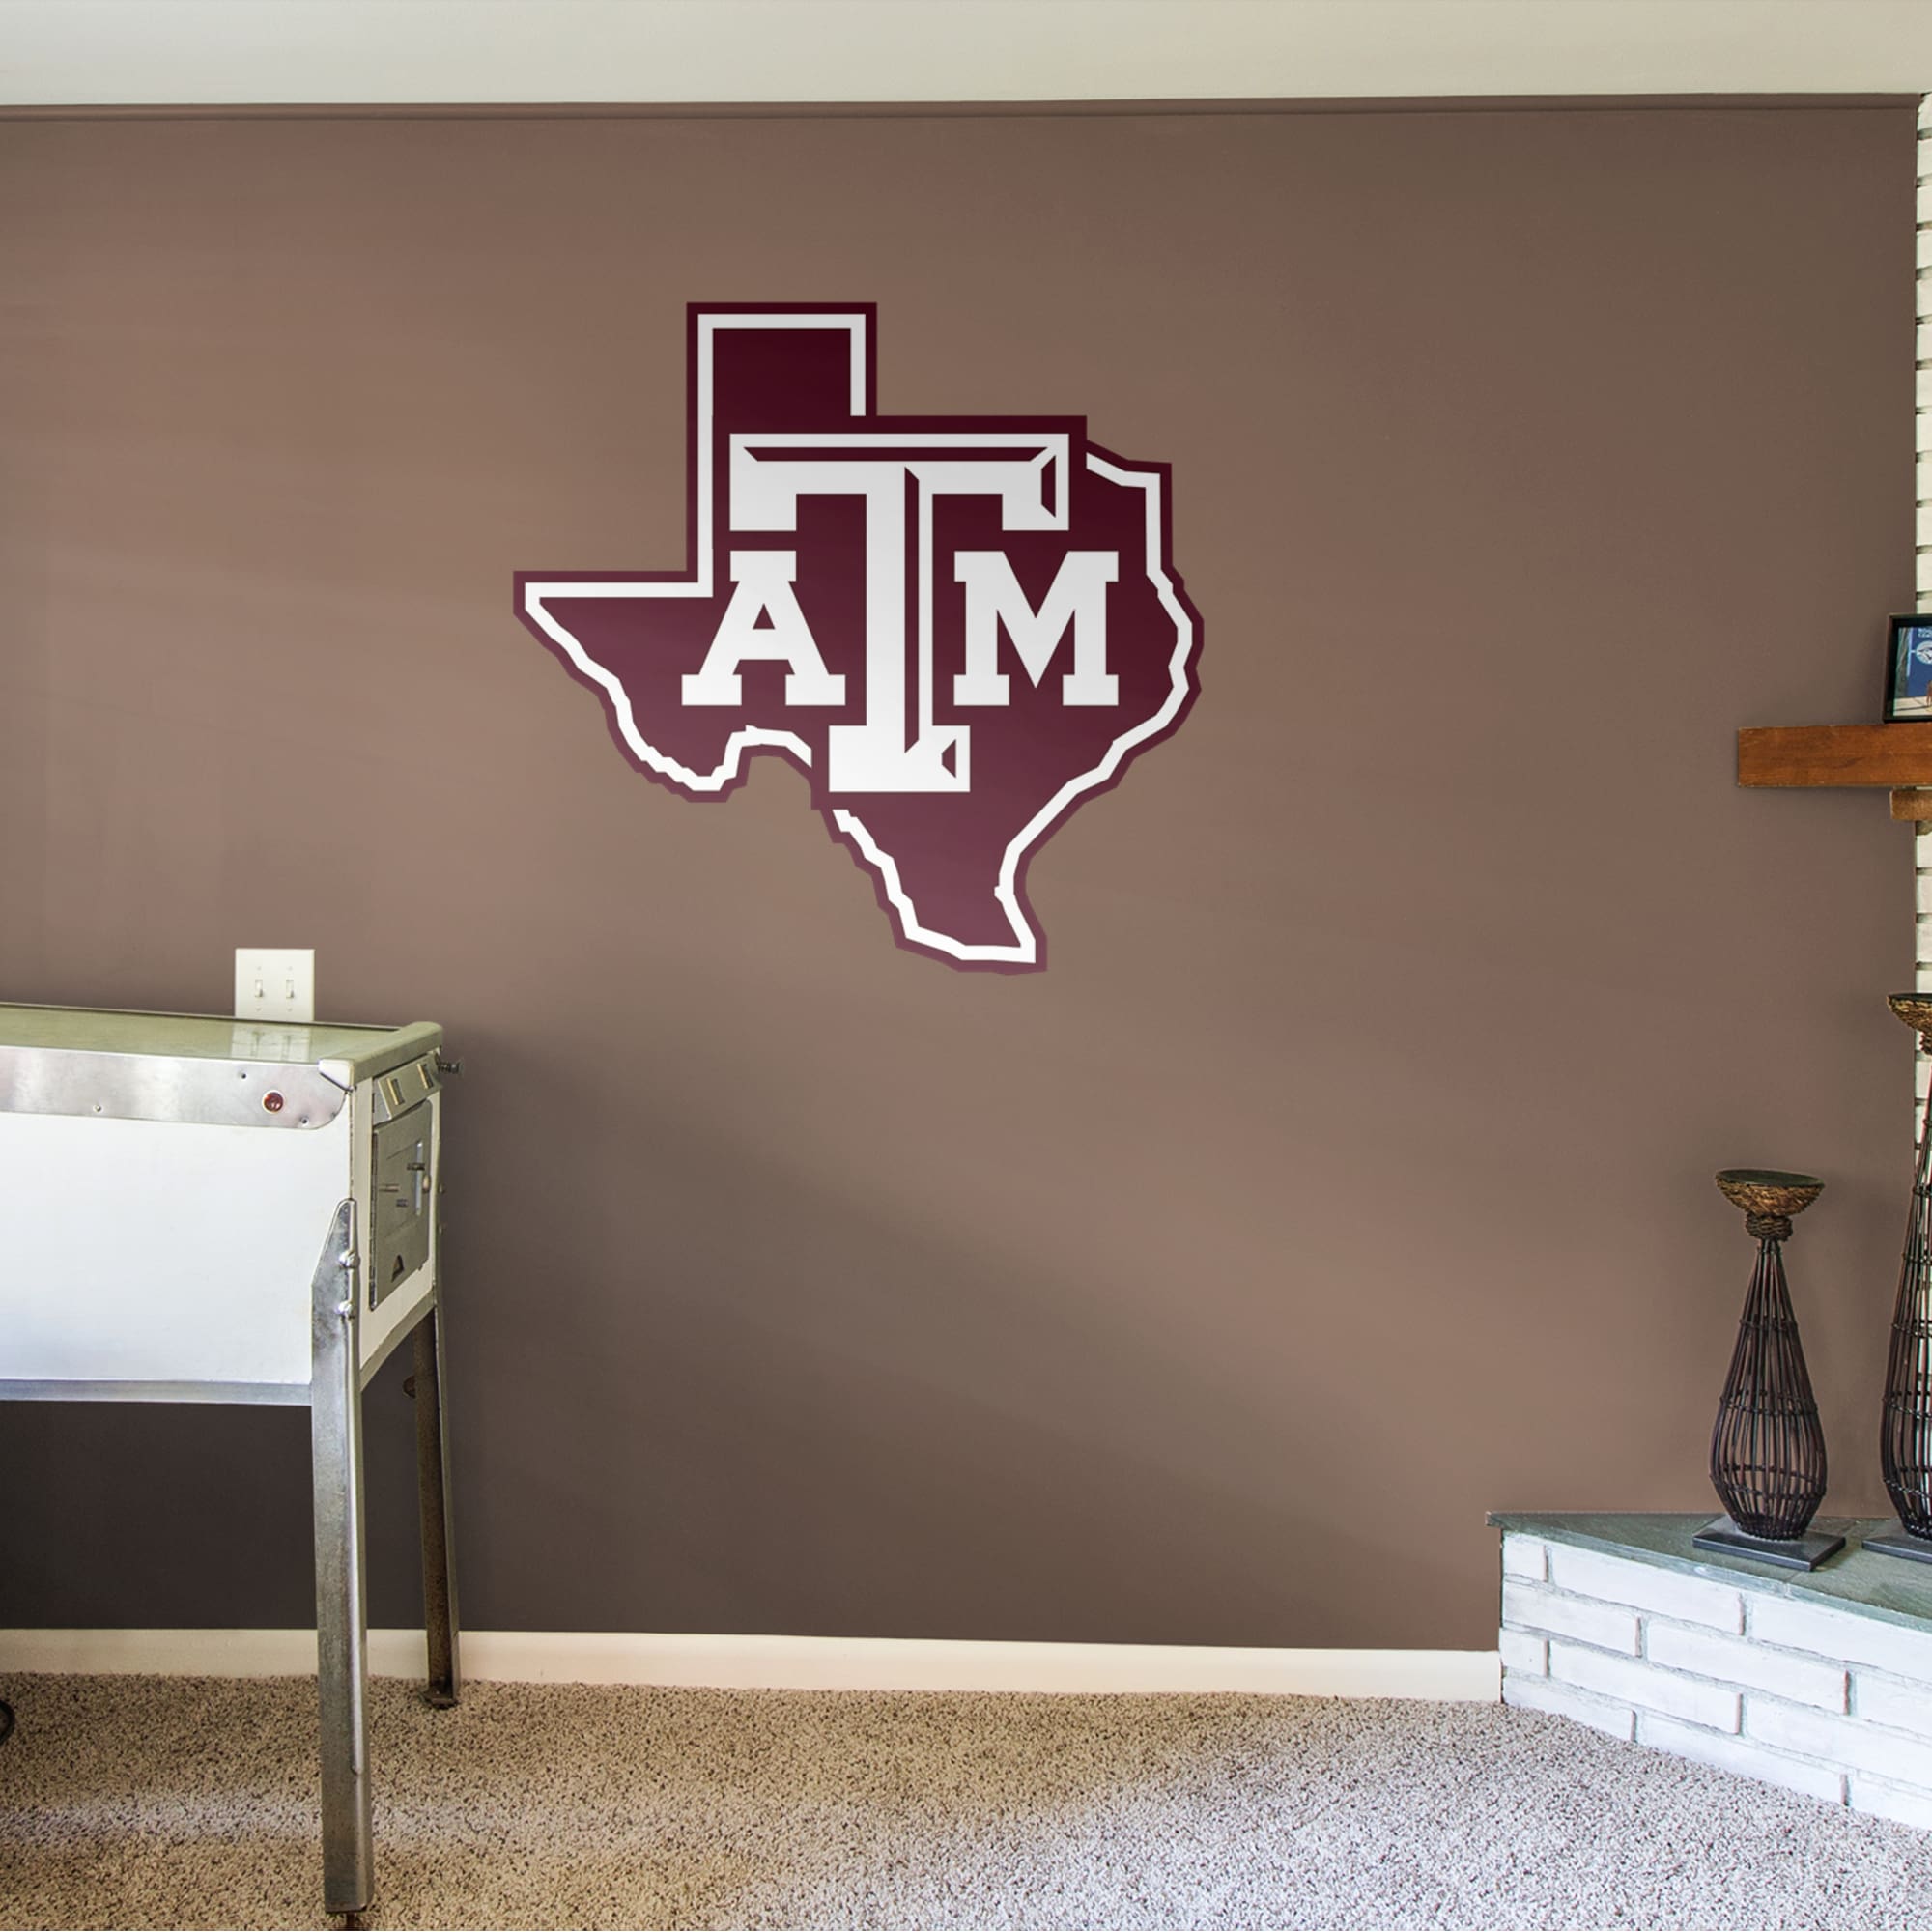 Texas A&M Aggies: Lone Star Logo - Officially Licensed Removable Wall Decal 44.0"W x 43.0"H by Fathead | Vinyl